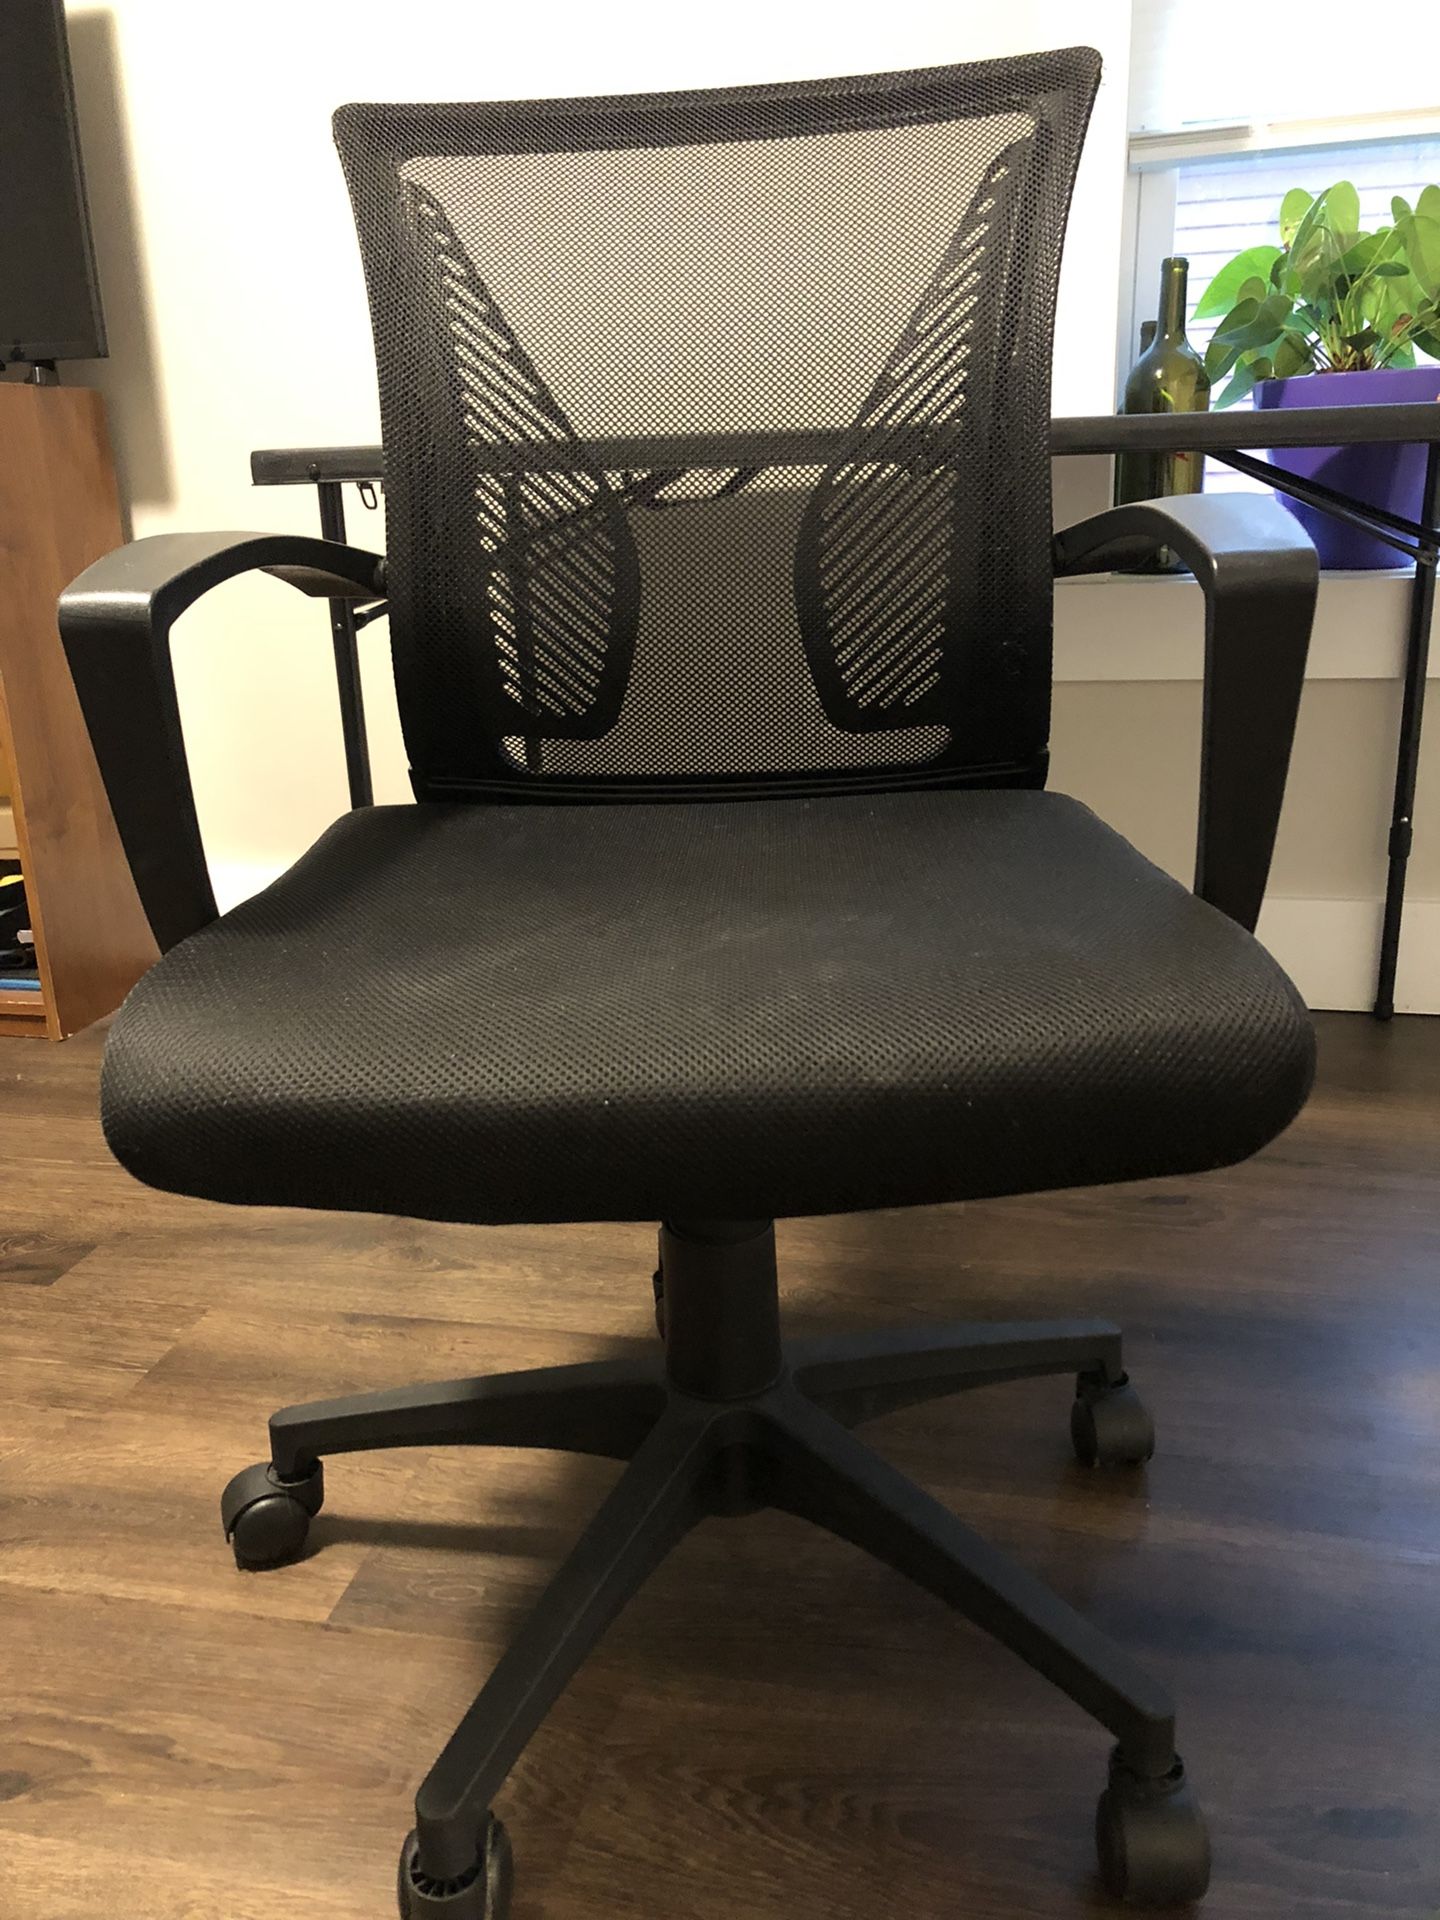 Office Chair With Foldable Table